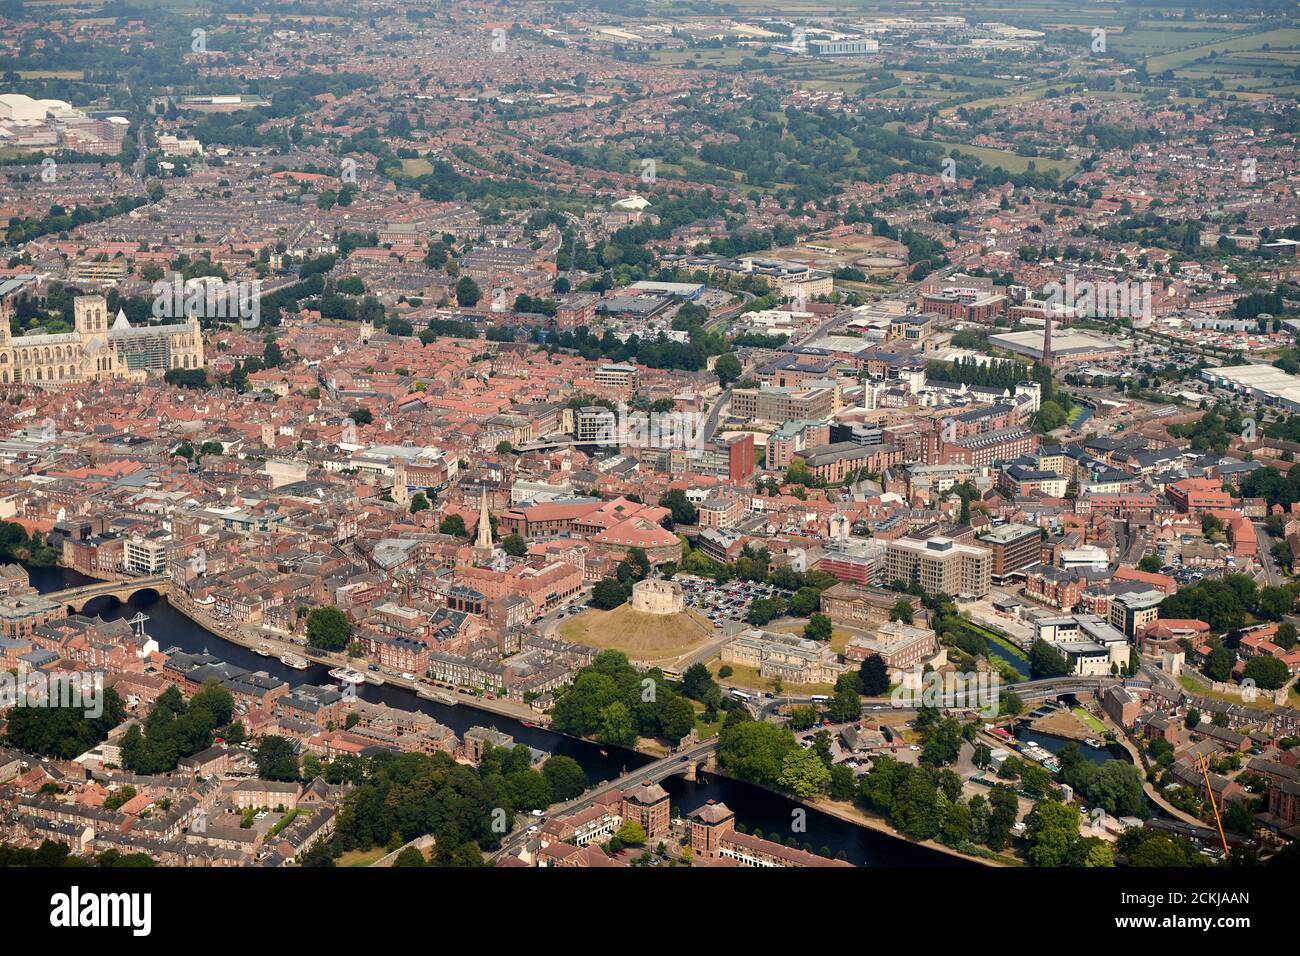 An aerial view of the City of York, North Yorkshire, northern England, UK Stock Photo